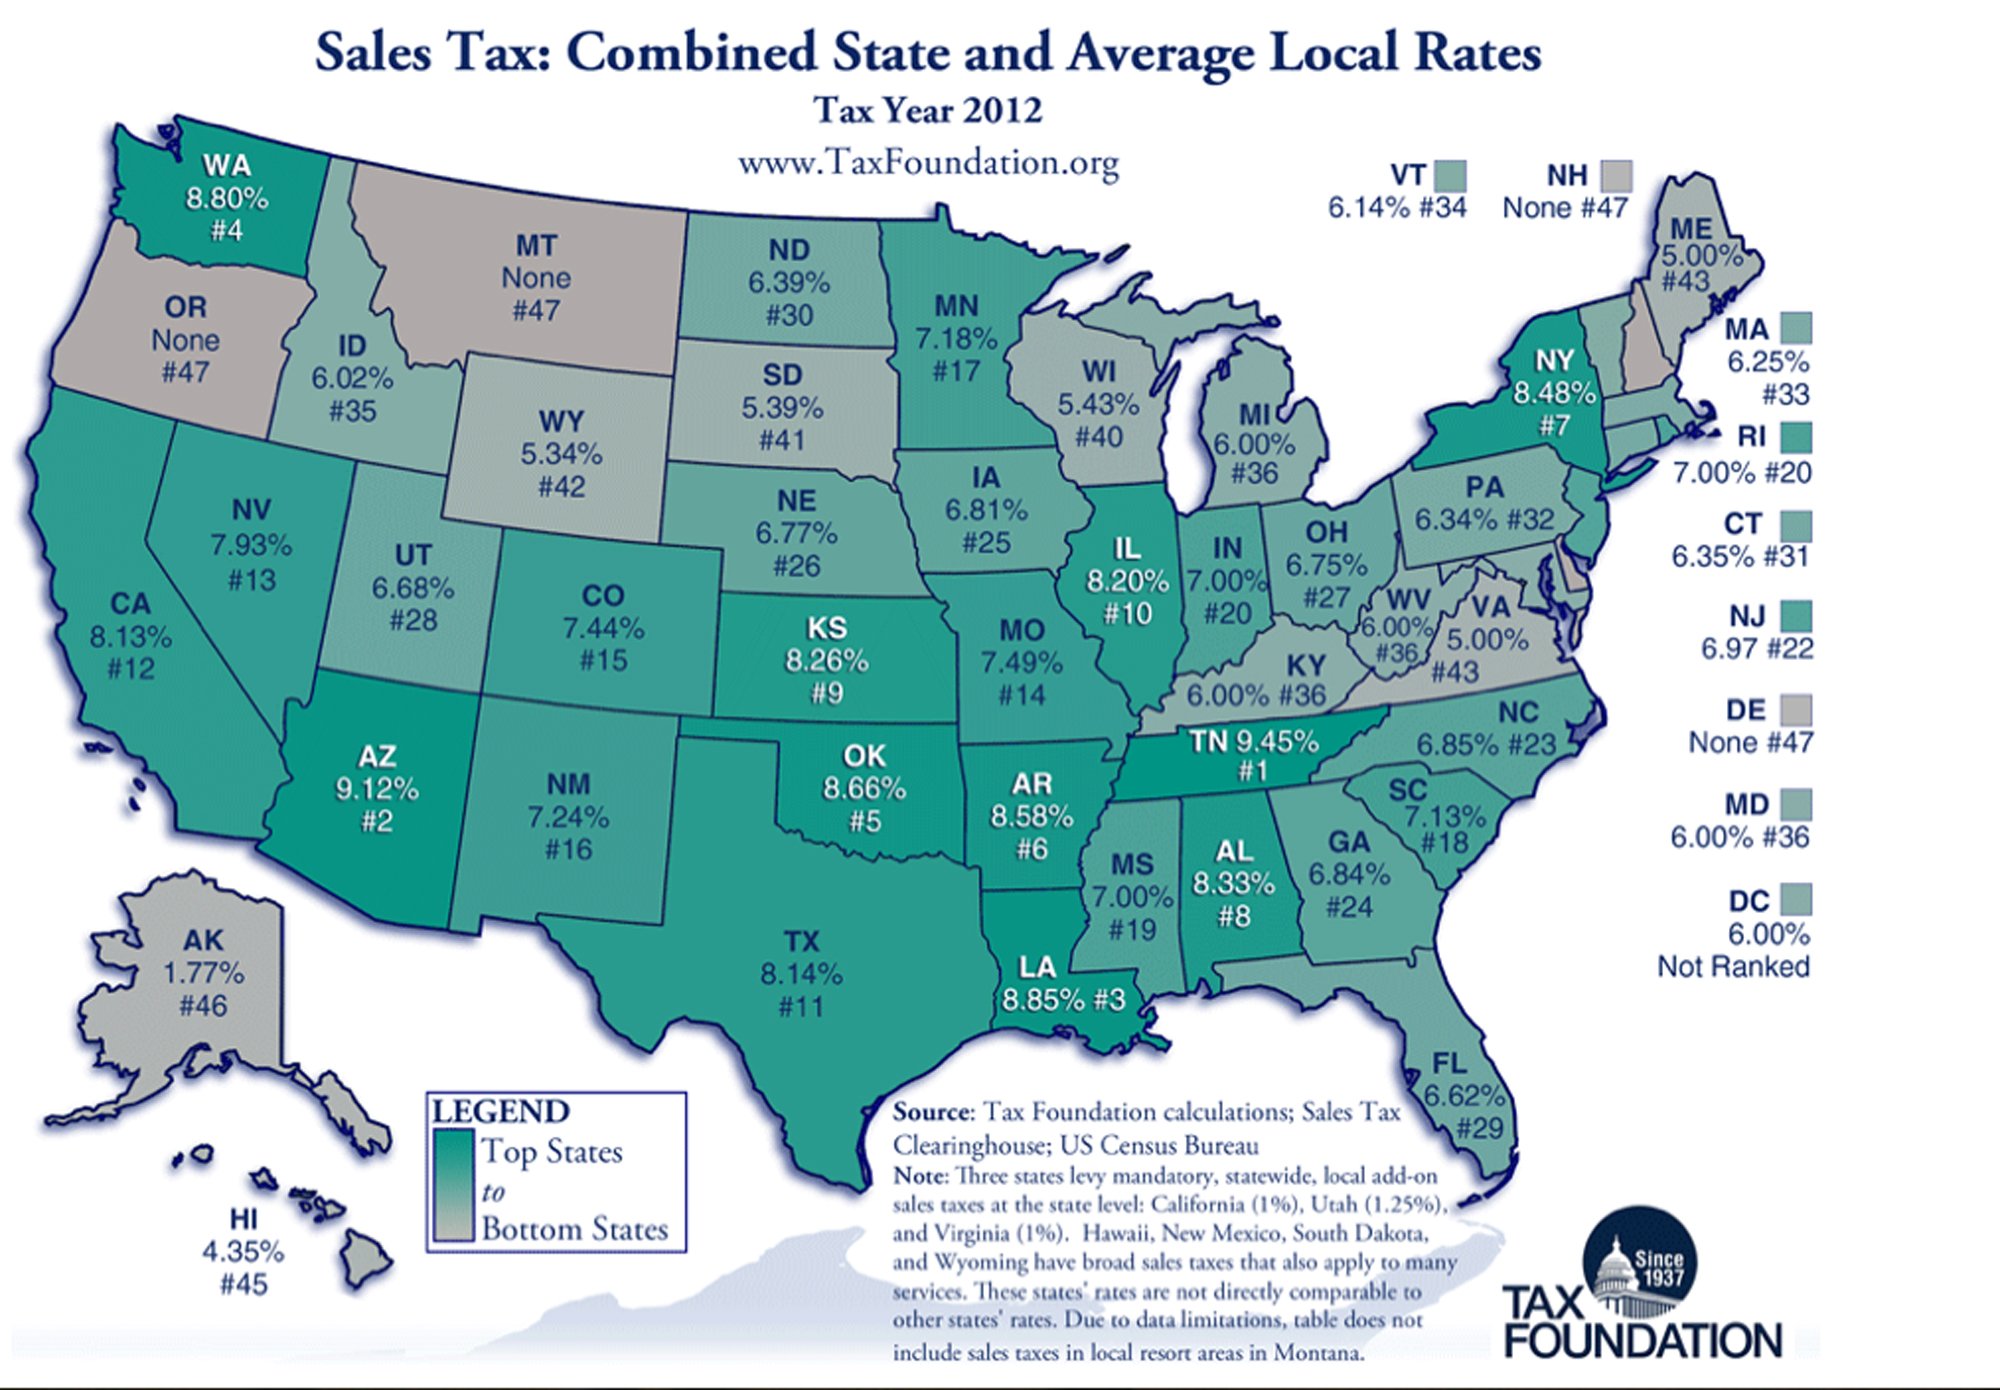 Azs combined sales tax rate 2nd